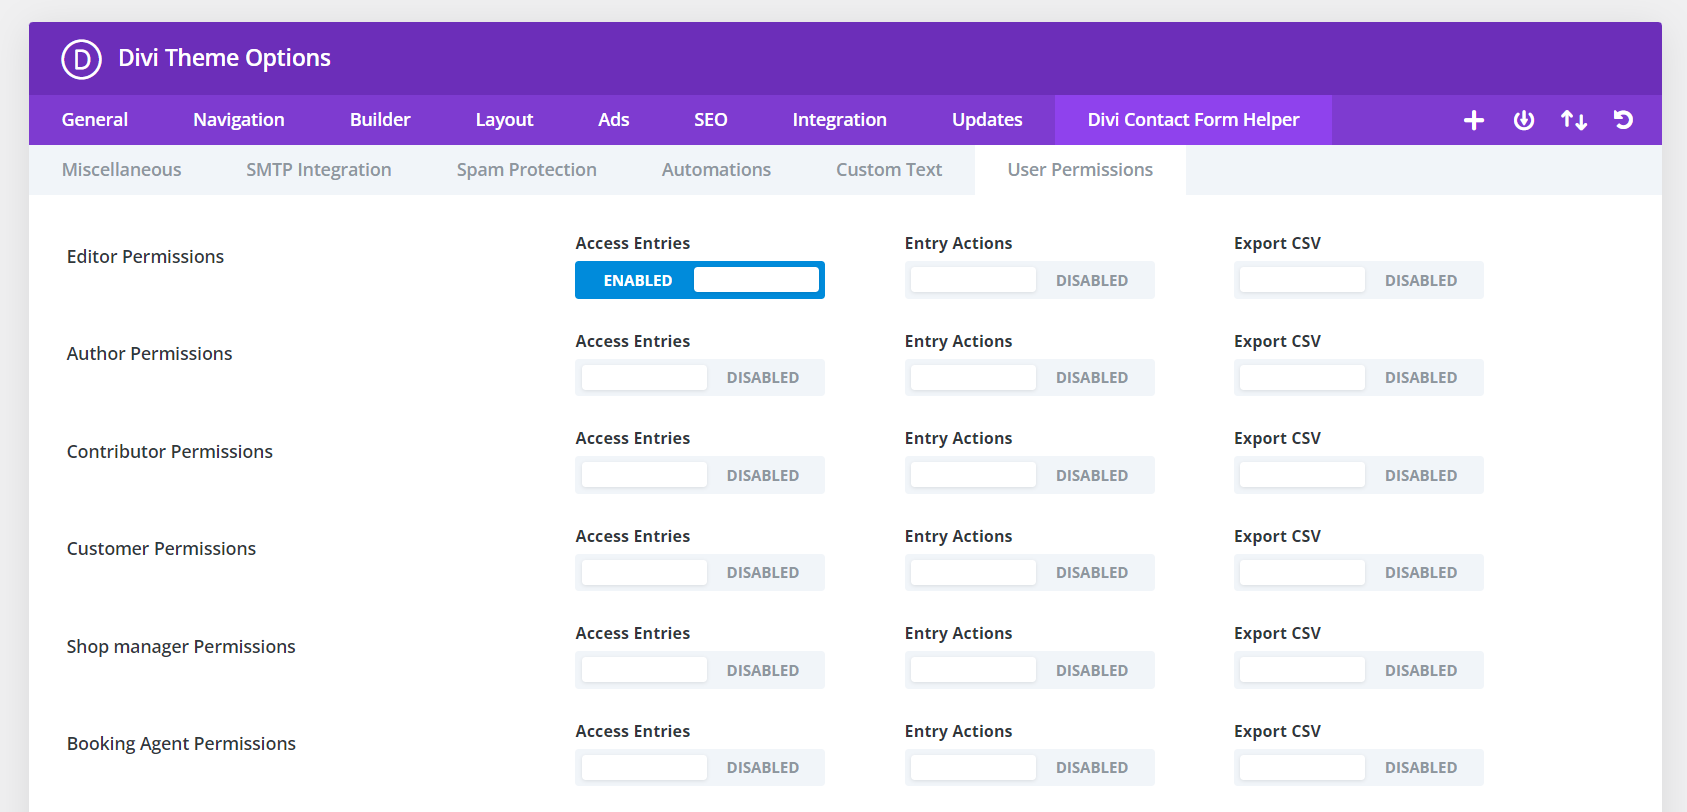 Screenshot of Divi Theme Options page with settings.